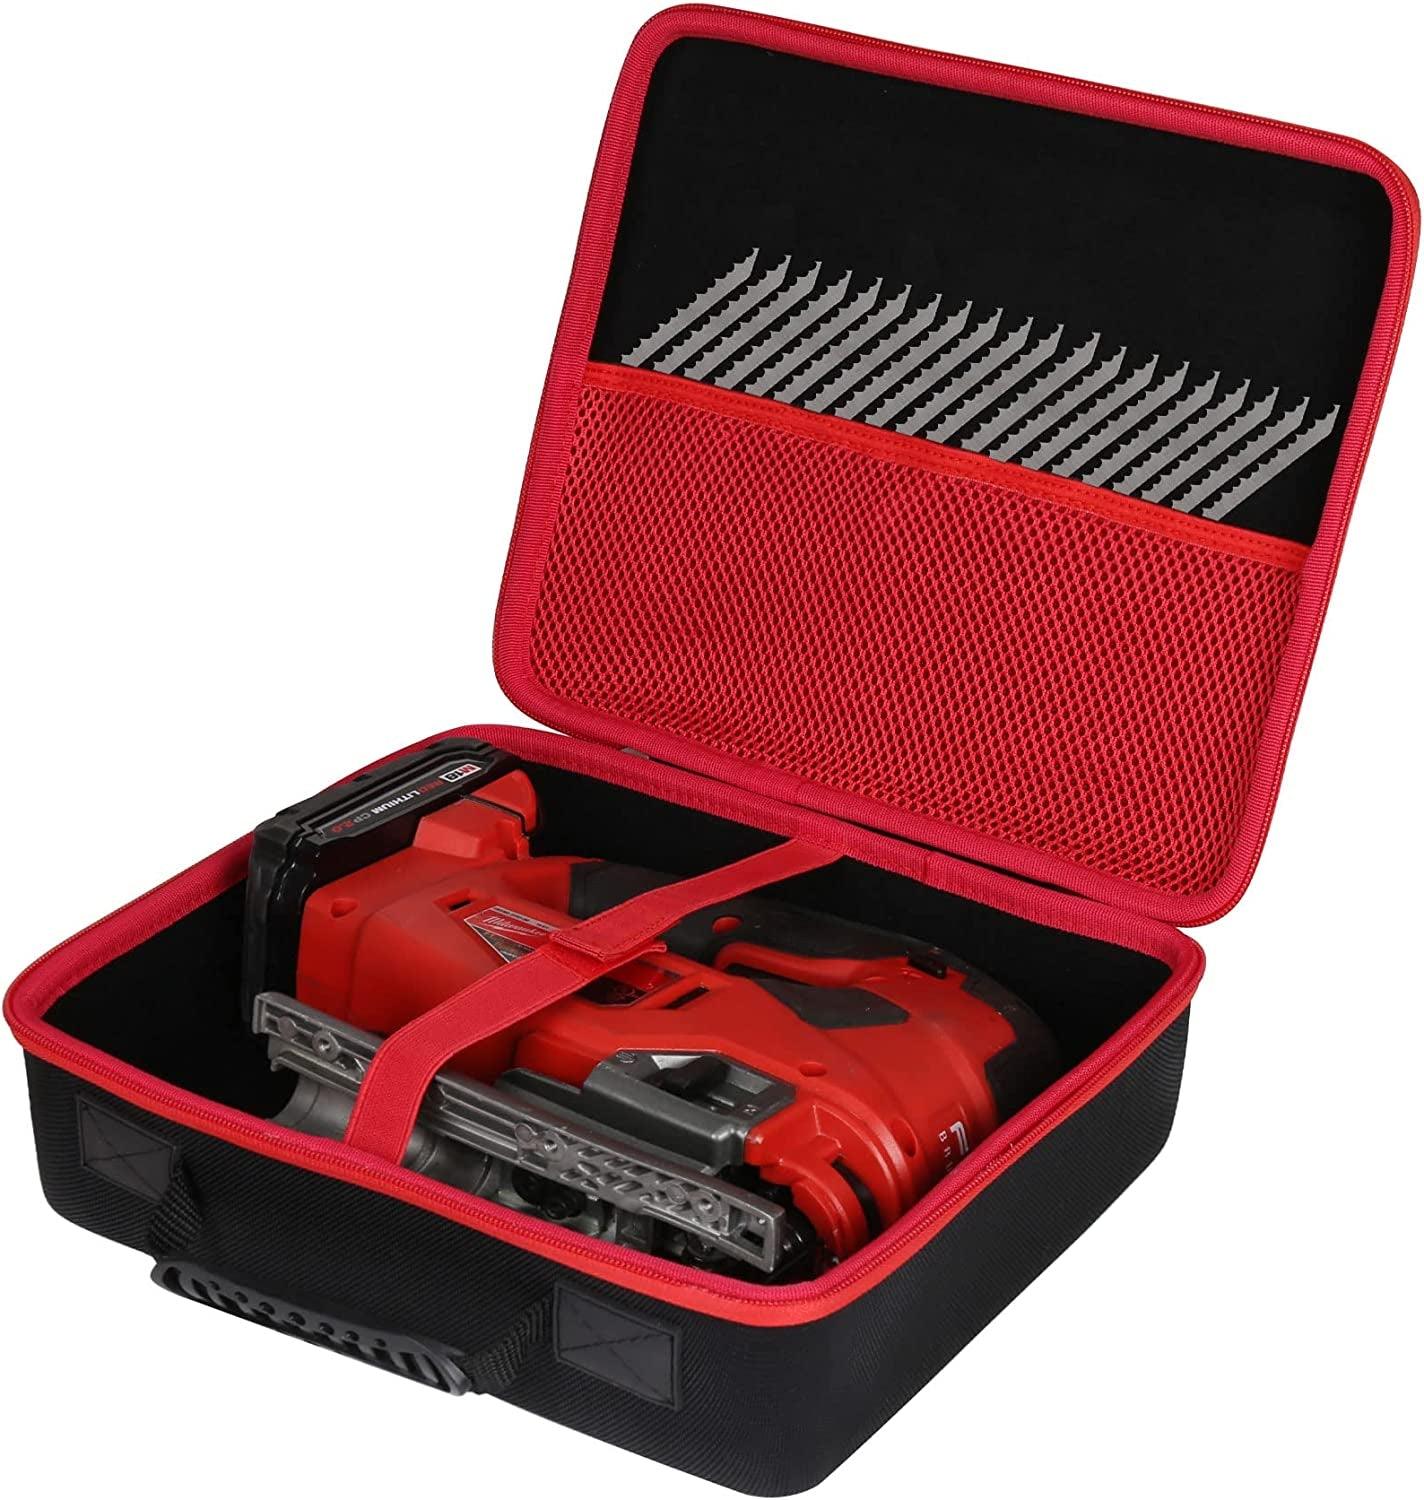 Hard Storage Case Replacement for Milwaukee 2737-20 M18 FUEL D-HANDLE JIG SAW 